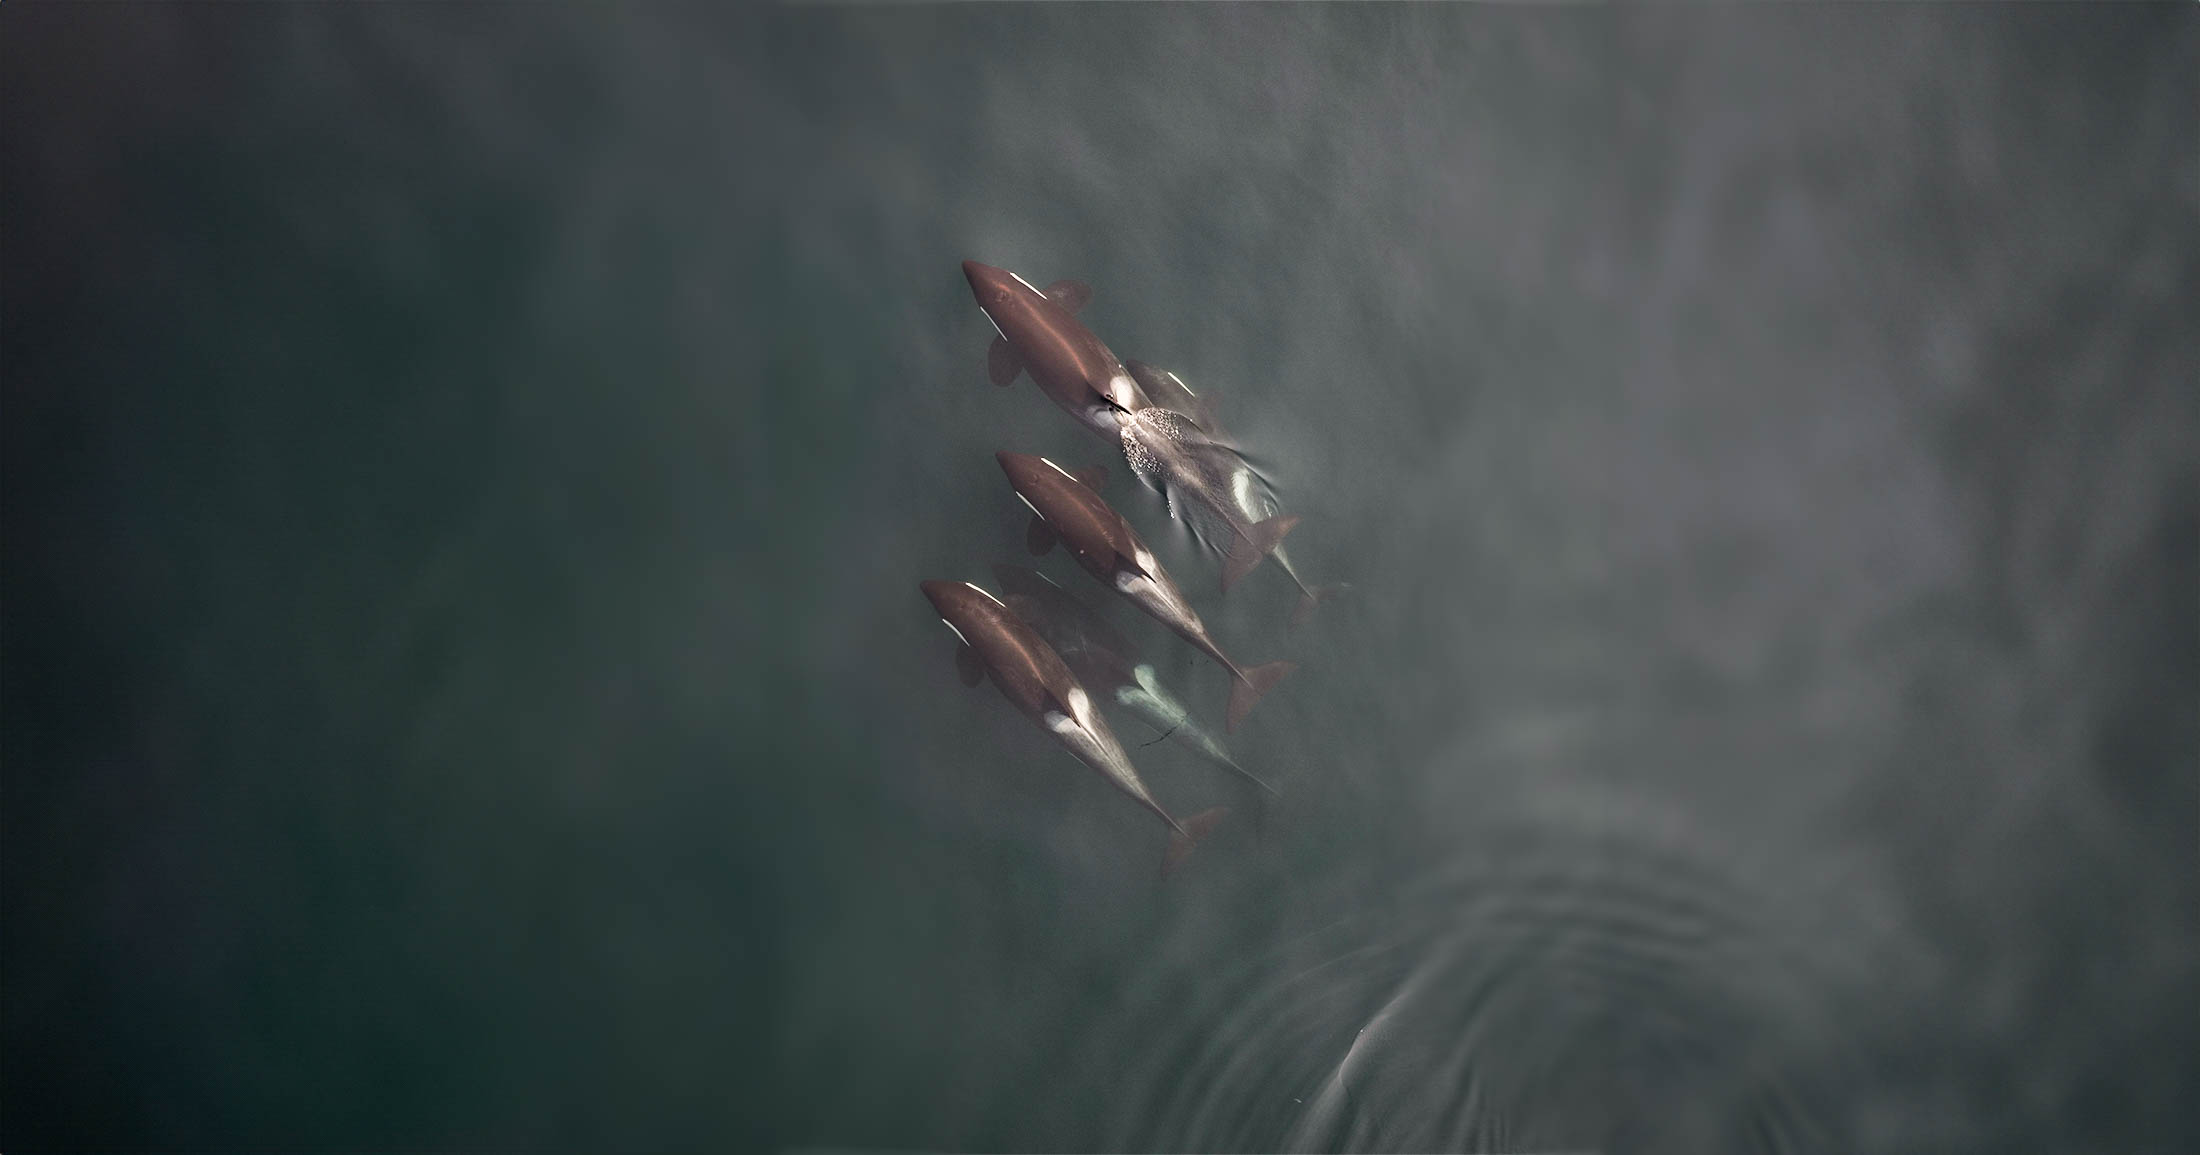 Overhead photo of four killer whales swimming together.